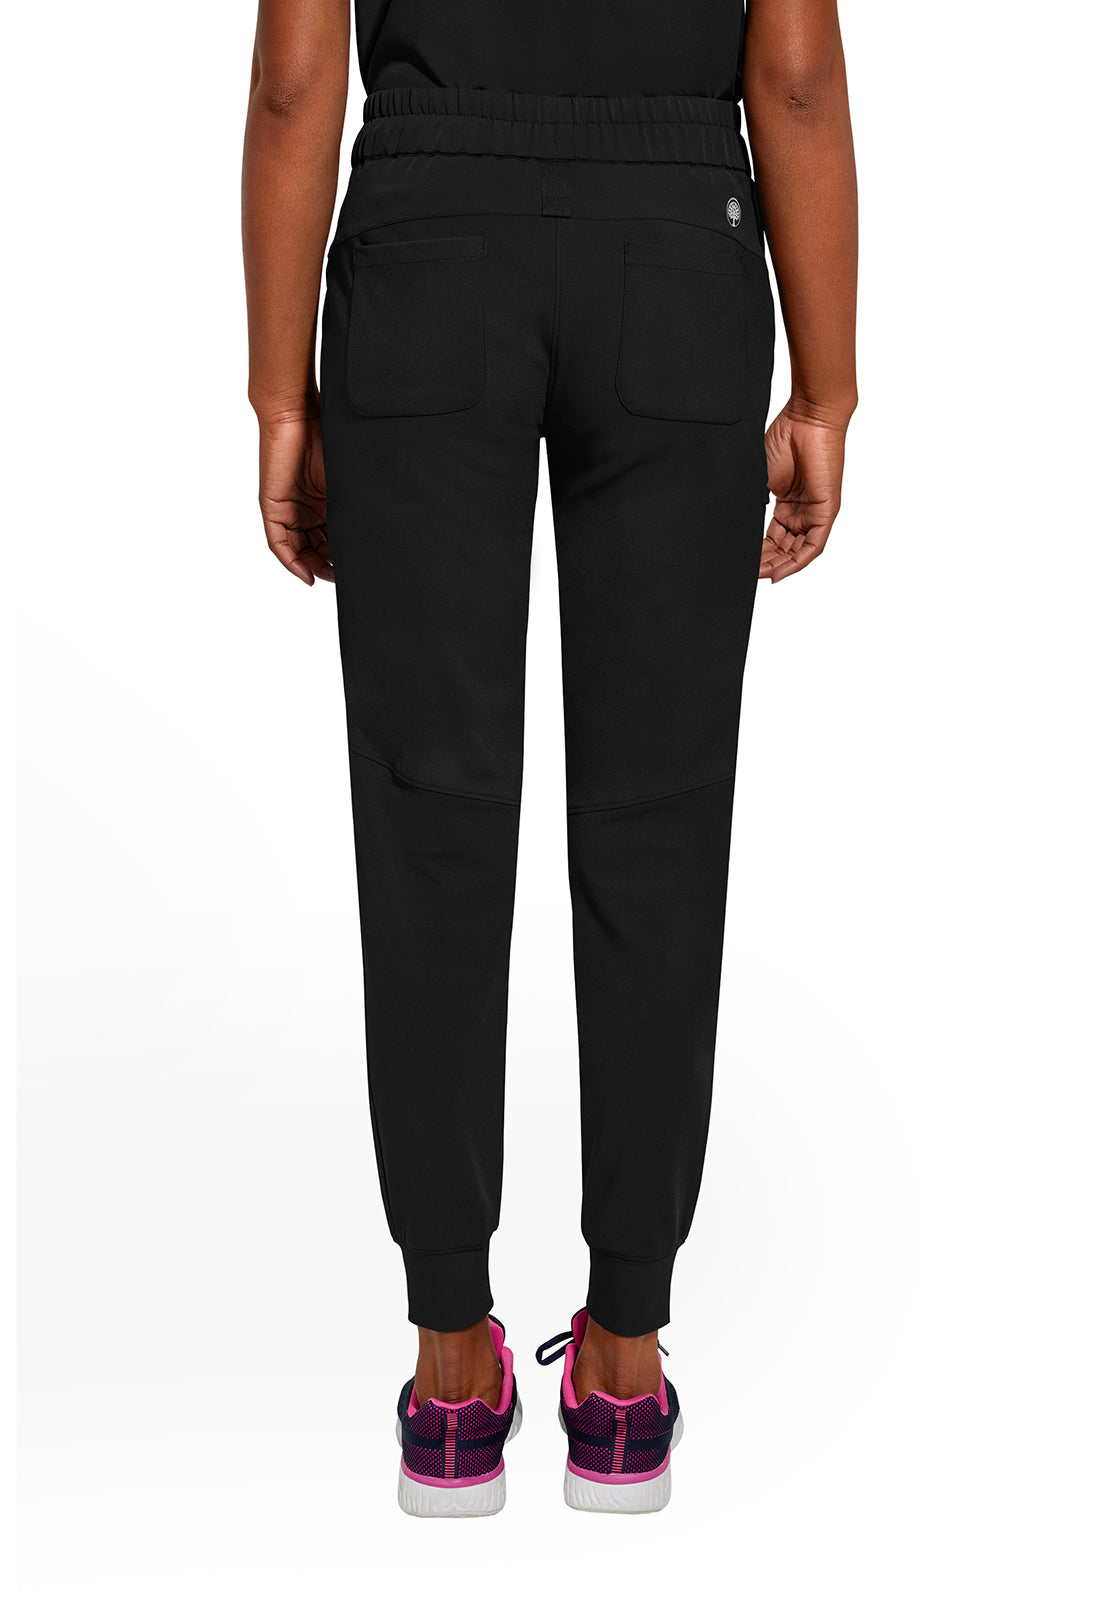 CHEF 360 Women's Low Rise STRETCH Yoga Chef Pants, Chef Pants